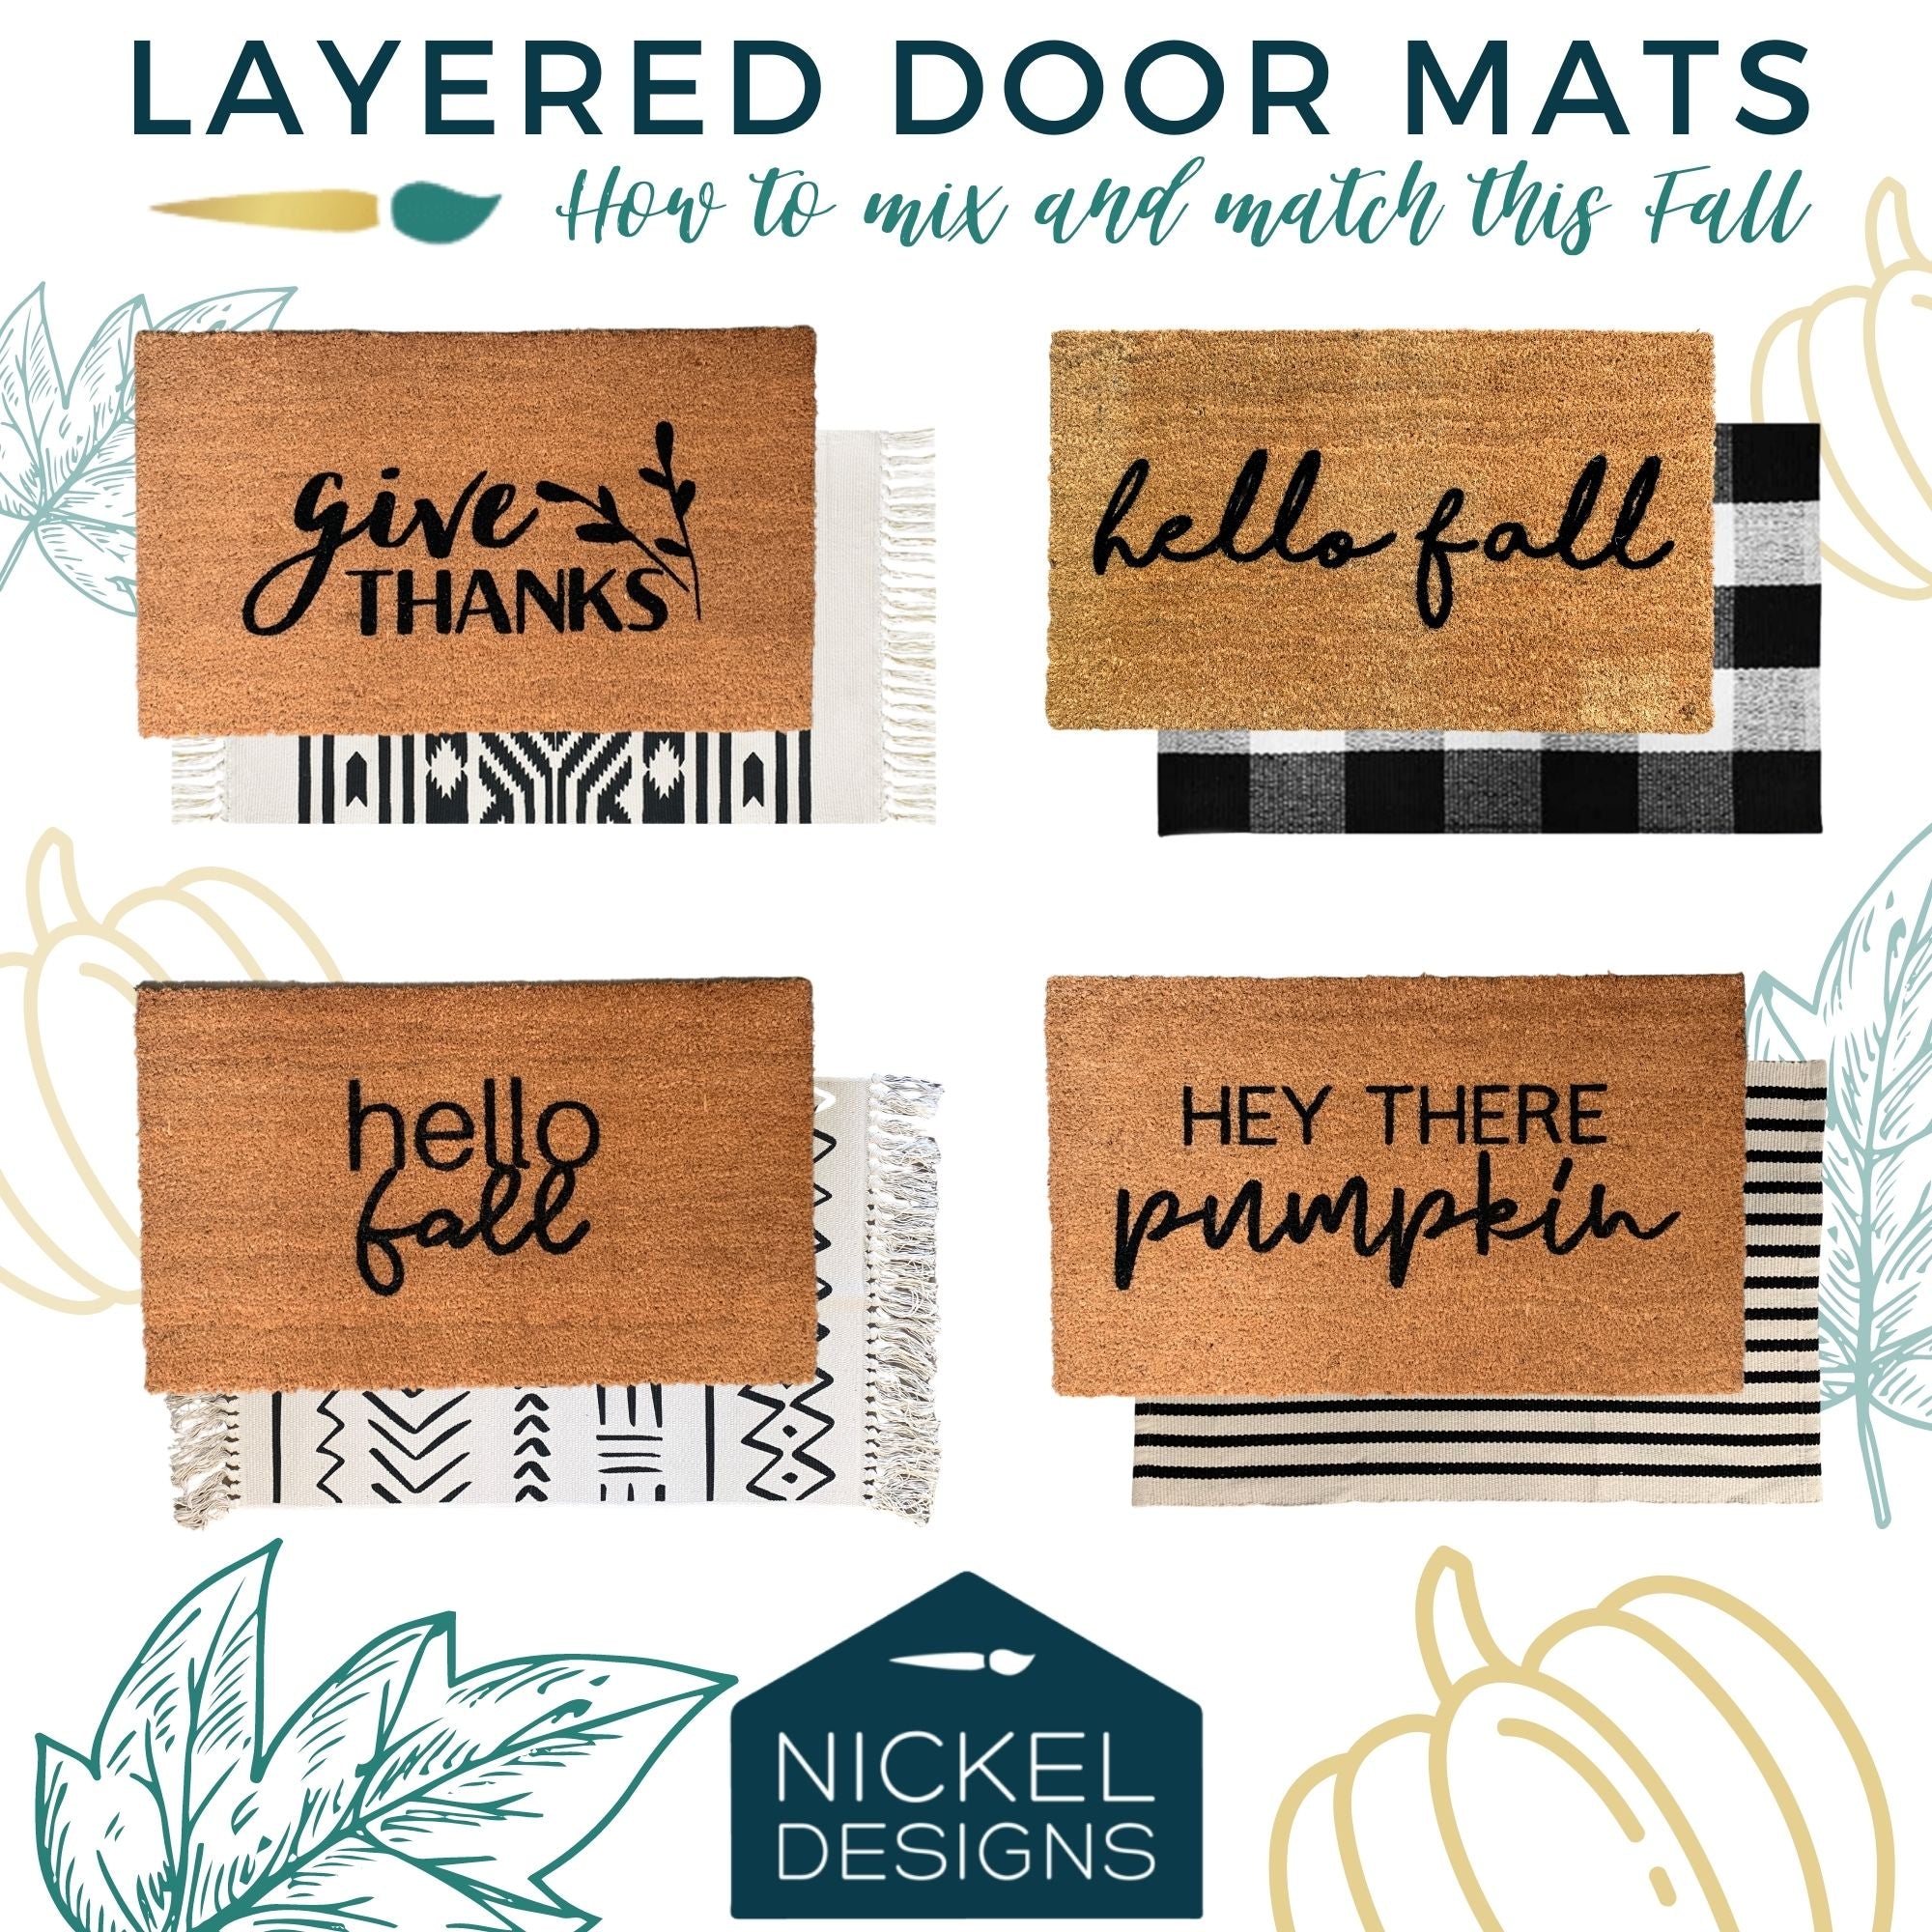 Easy fall porch update! Layer your doormat this fall.